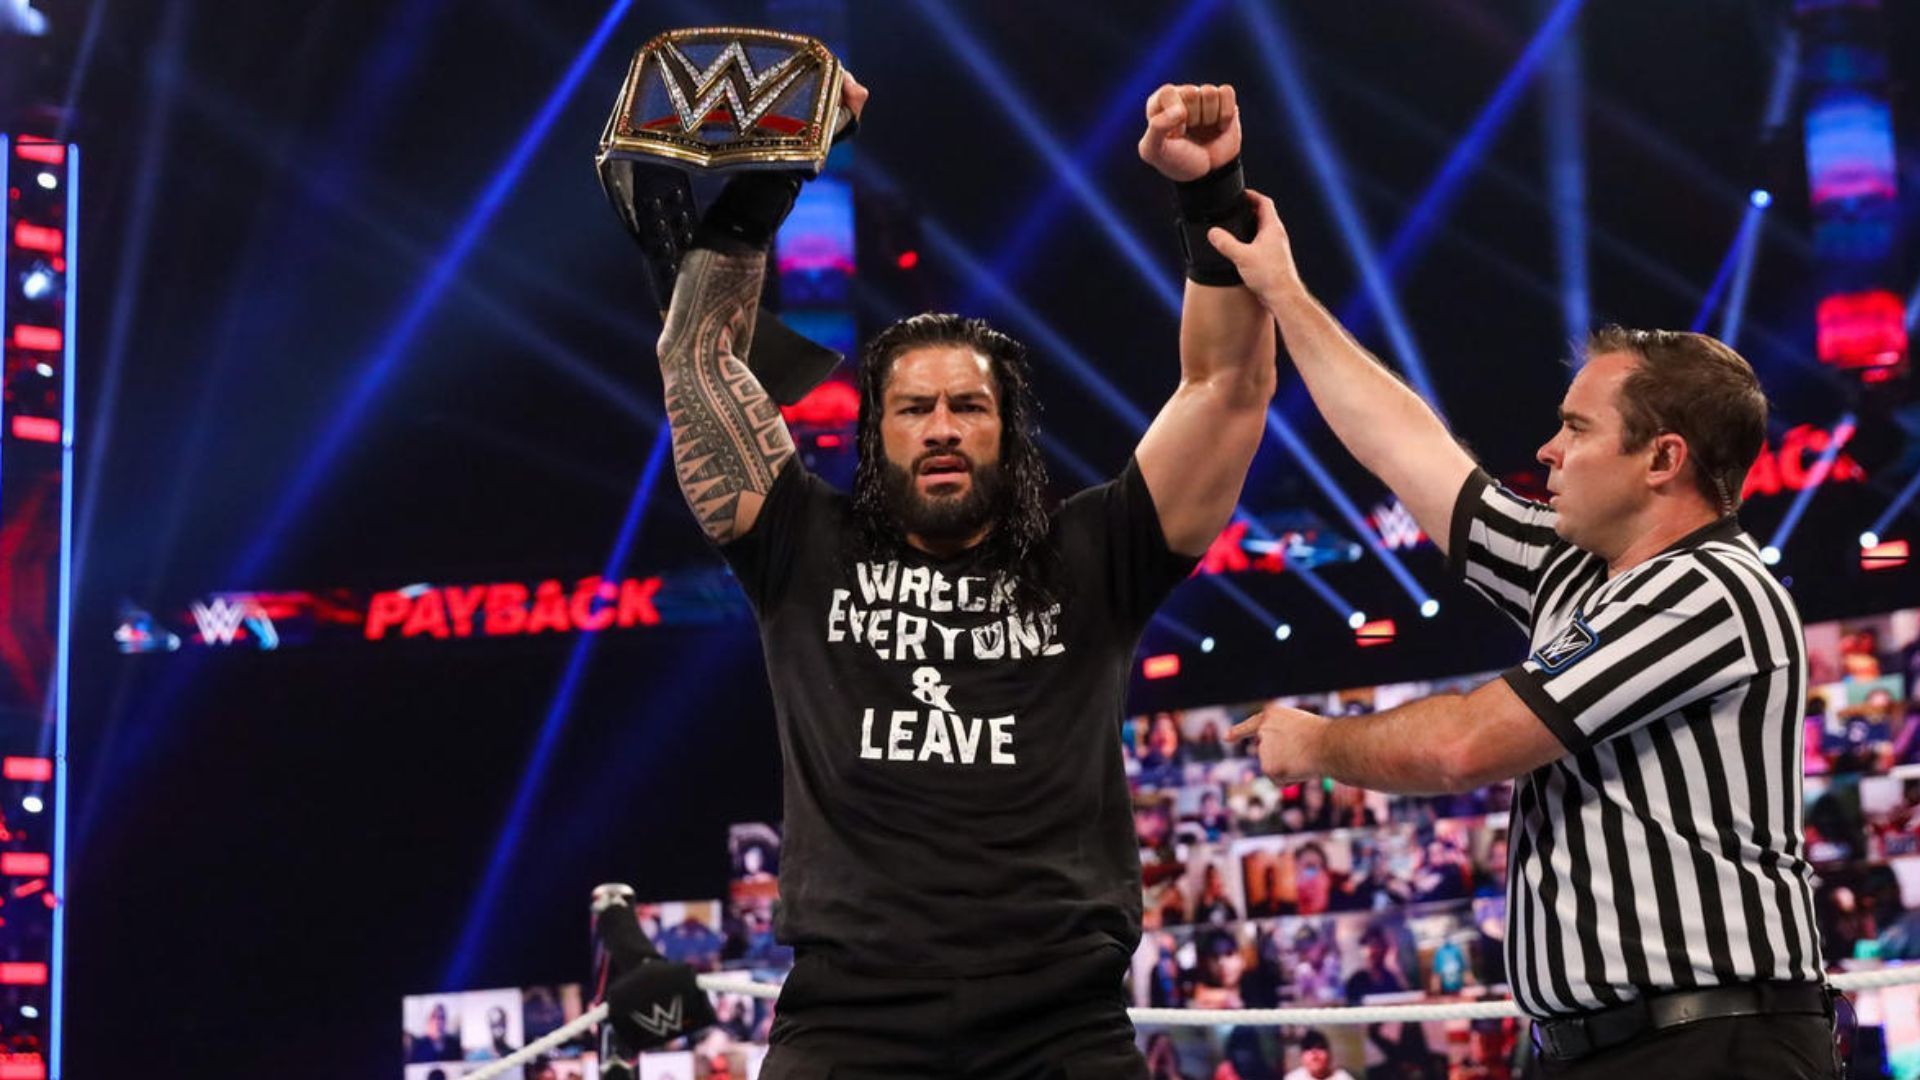 Roman Reigns at WWE Payback 2020!